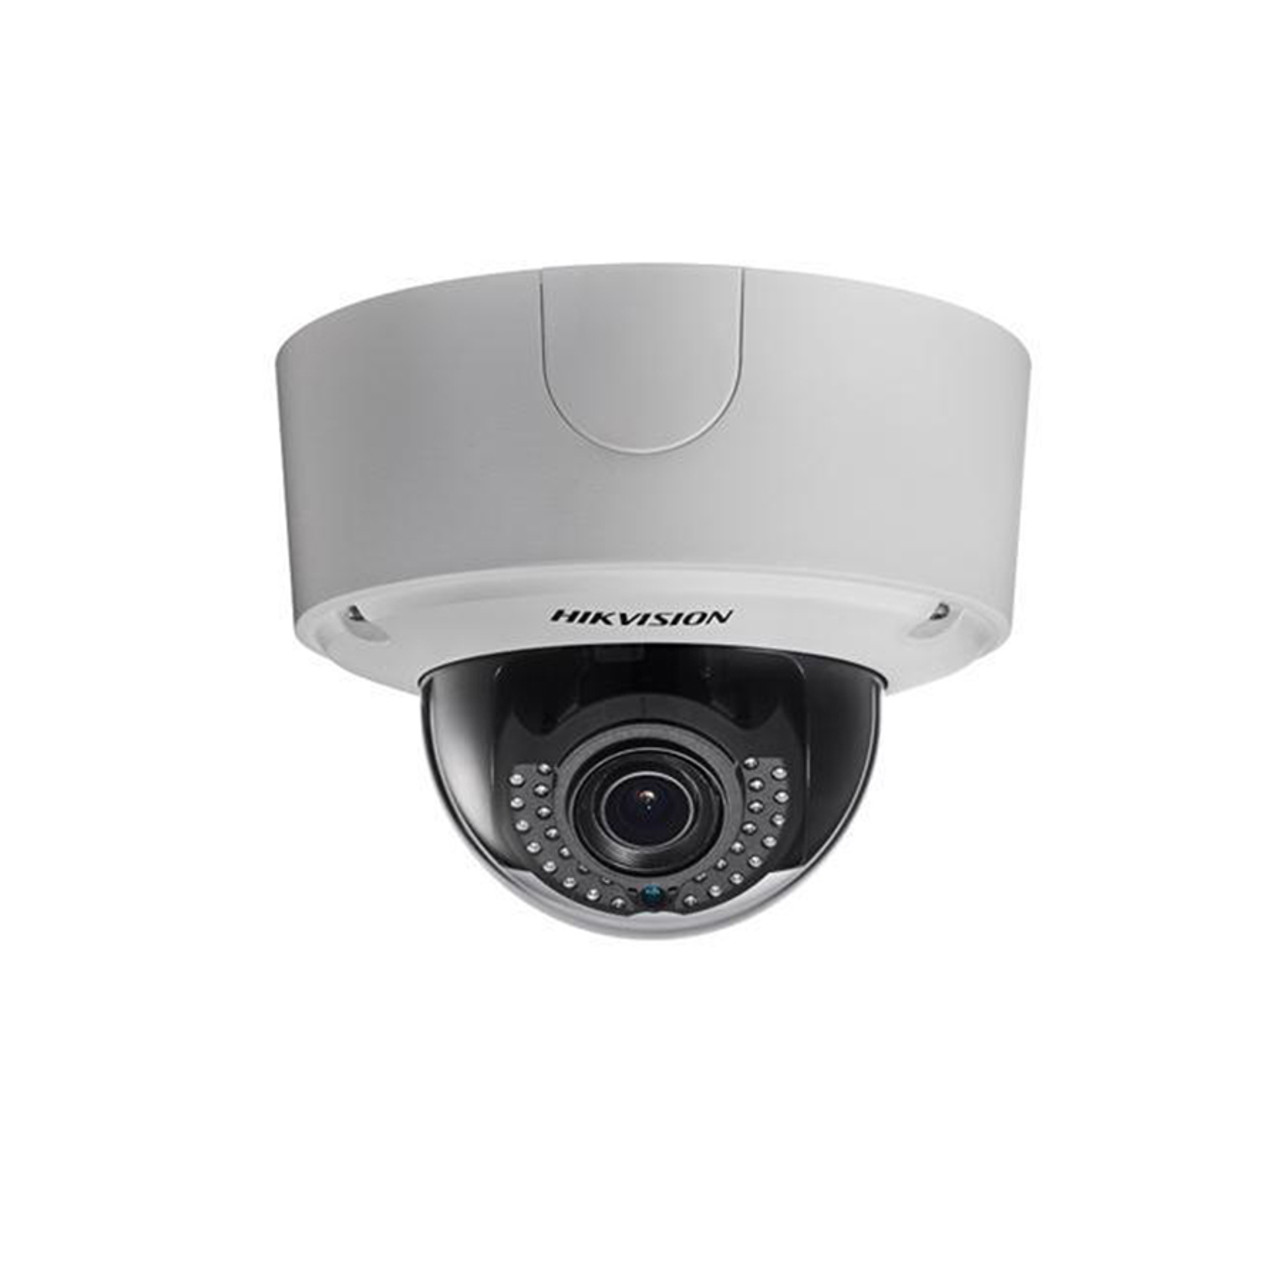 hikvision quality